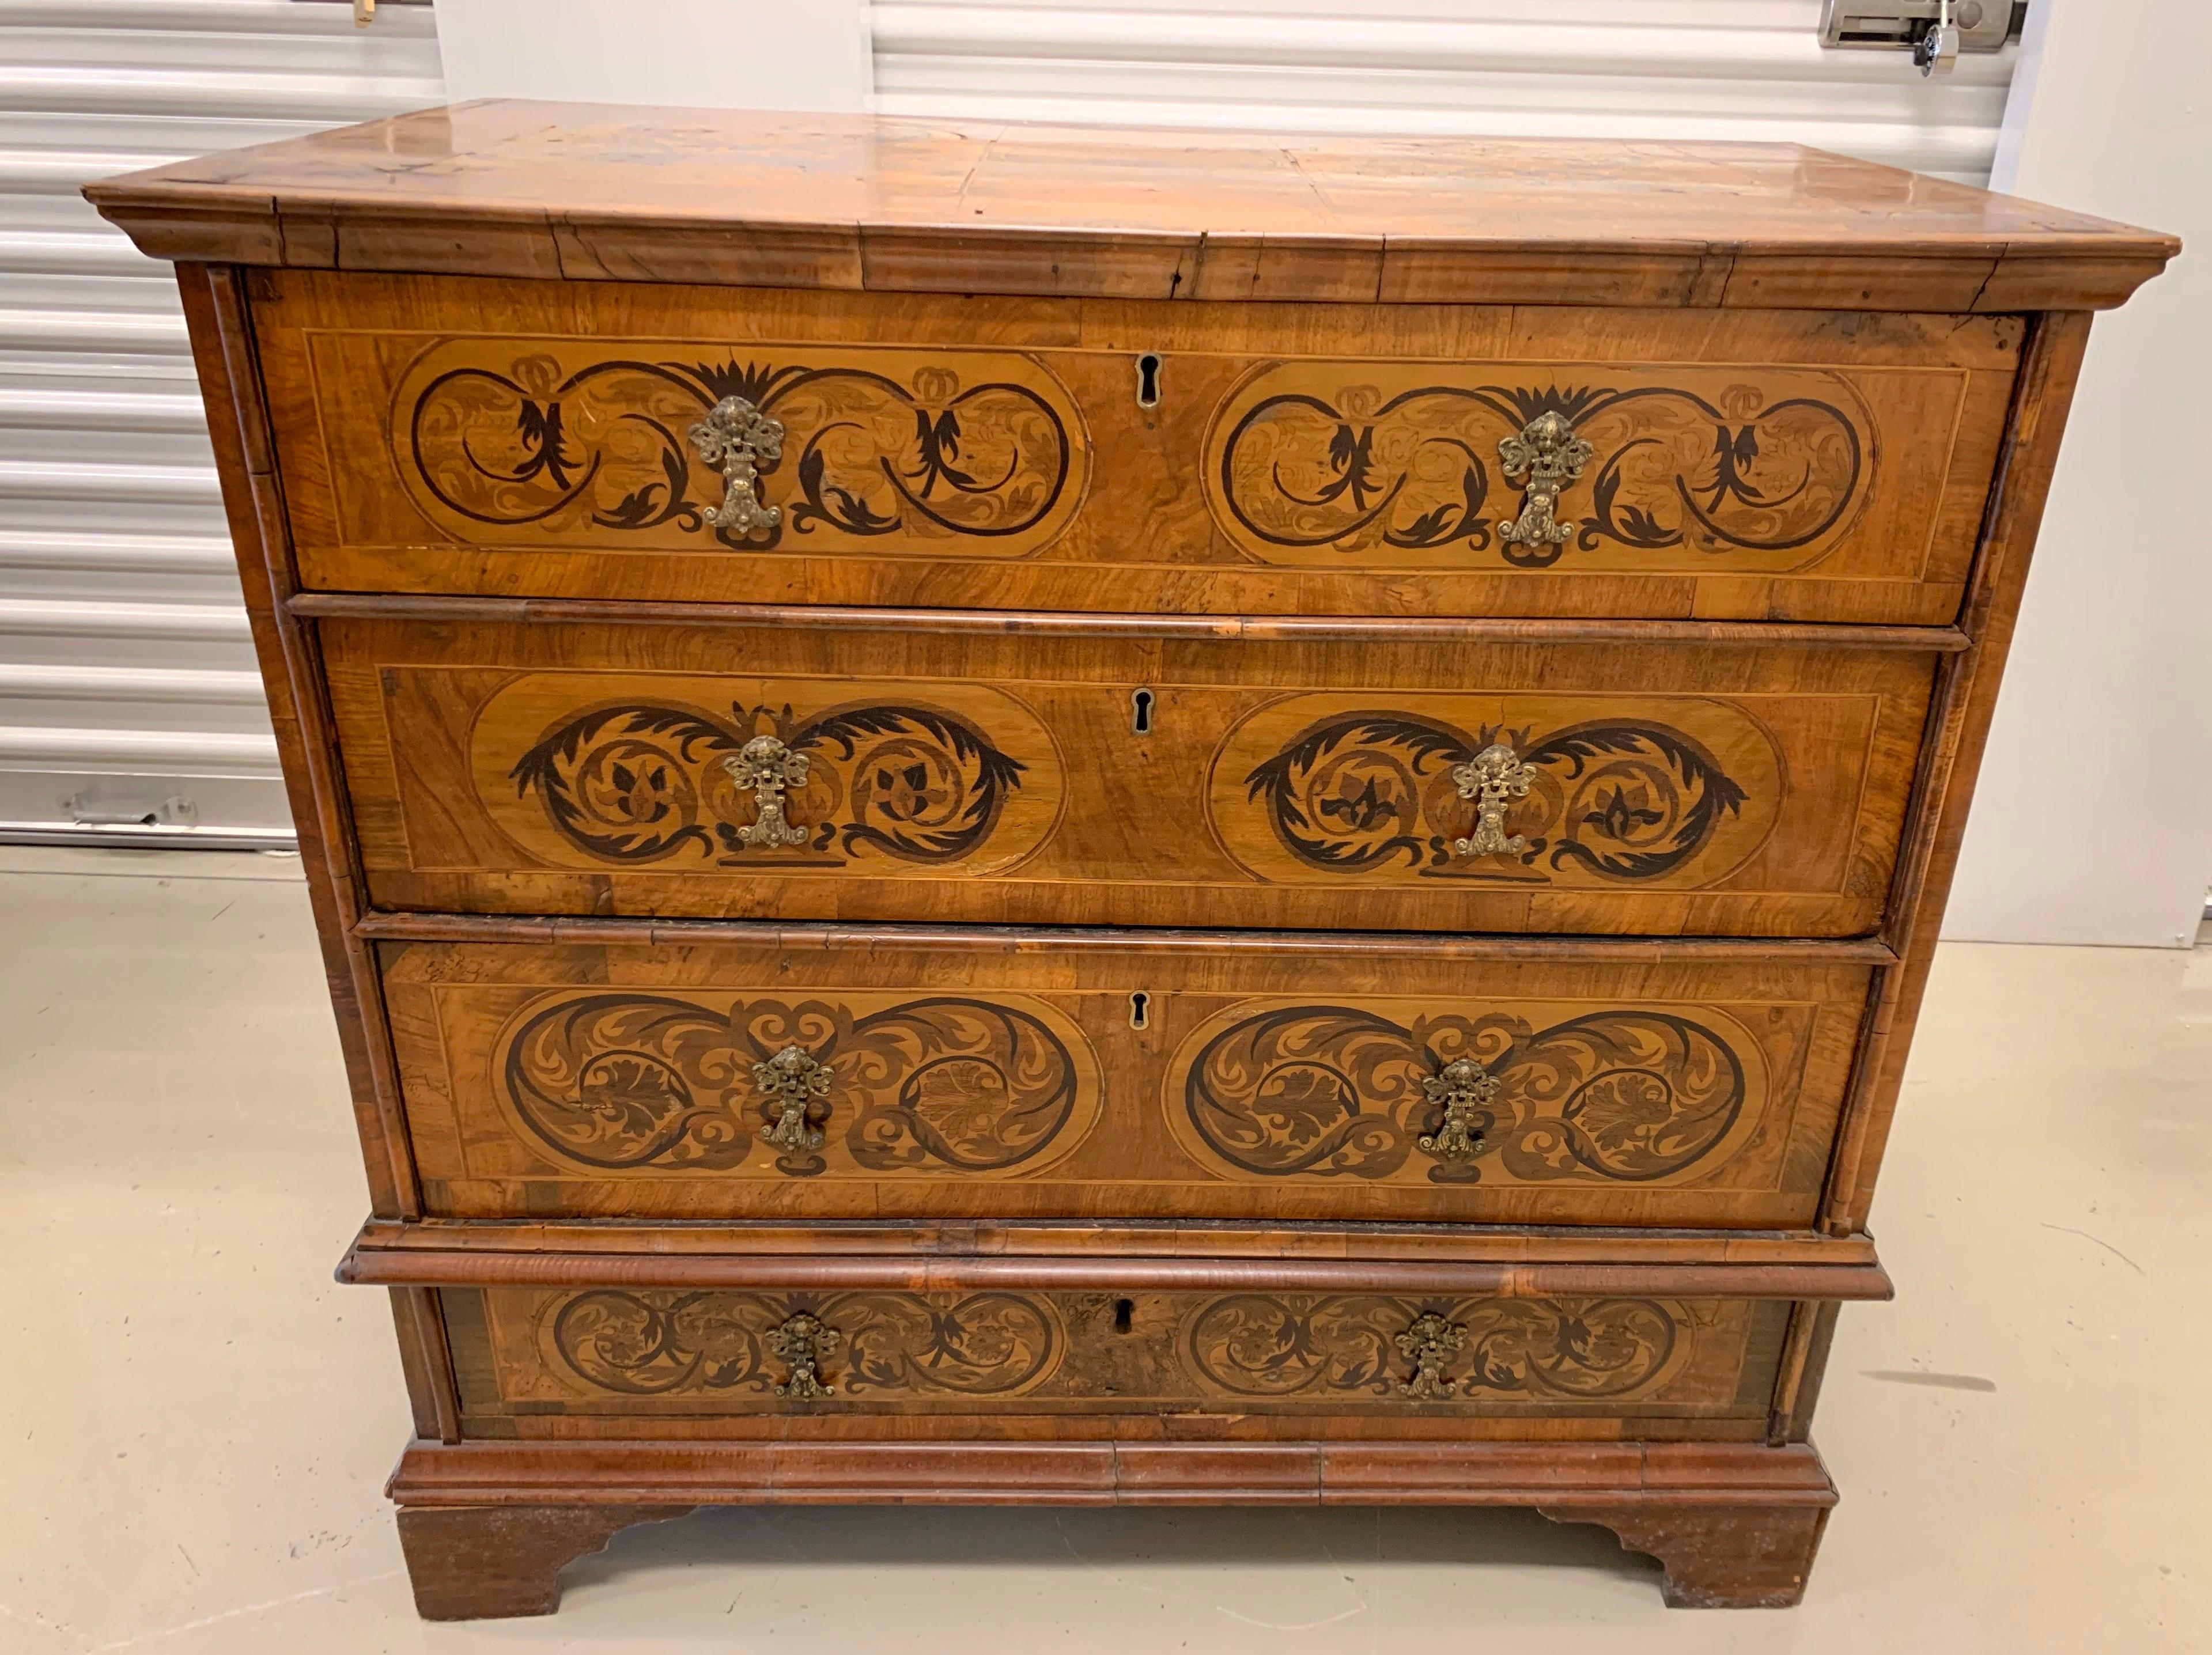 Rare antique marquetry chest of drawers circa early 19th century. There are some losses as would be expected from a piece of this age. We have taken several photographs to show losses. That said, the piece is exquisite.